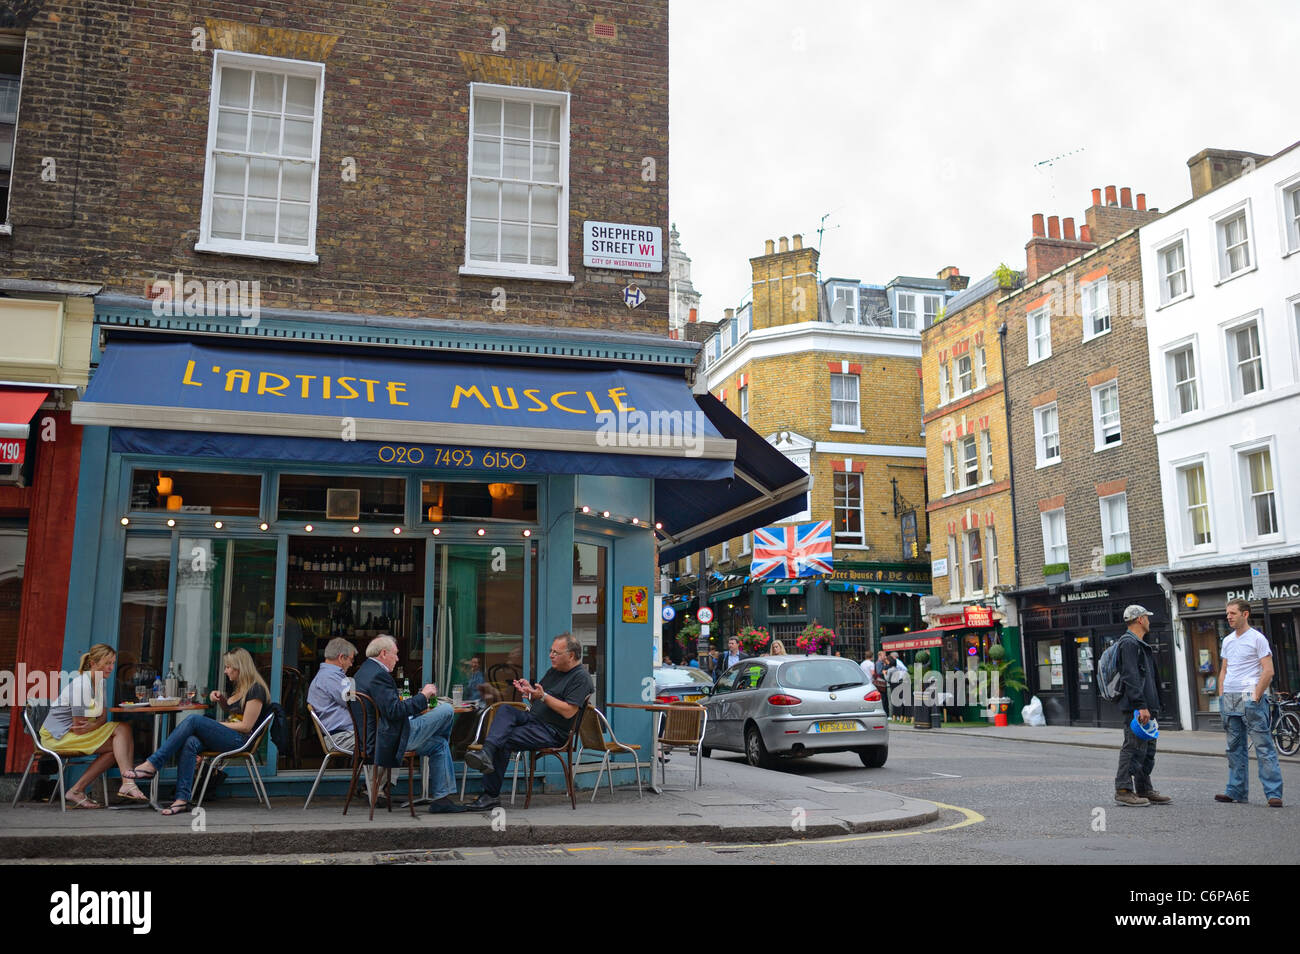 Shepherd Street Market, Mayfair, Westminster, Londres, Angleterre, Royaume-Uni, Europe Banque D'Images